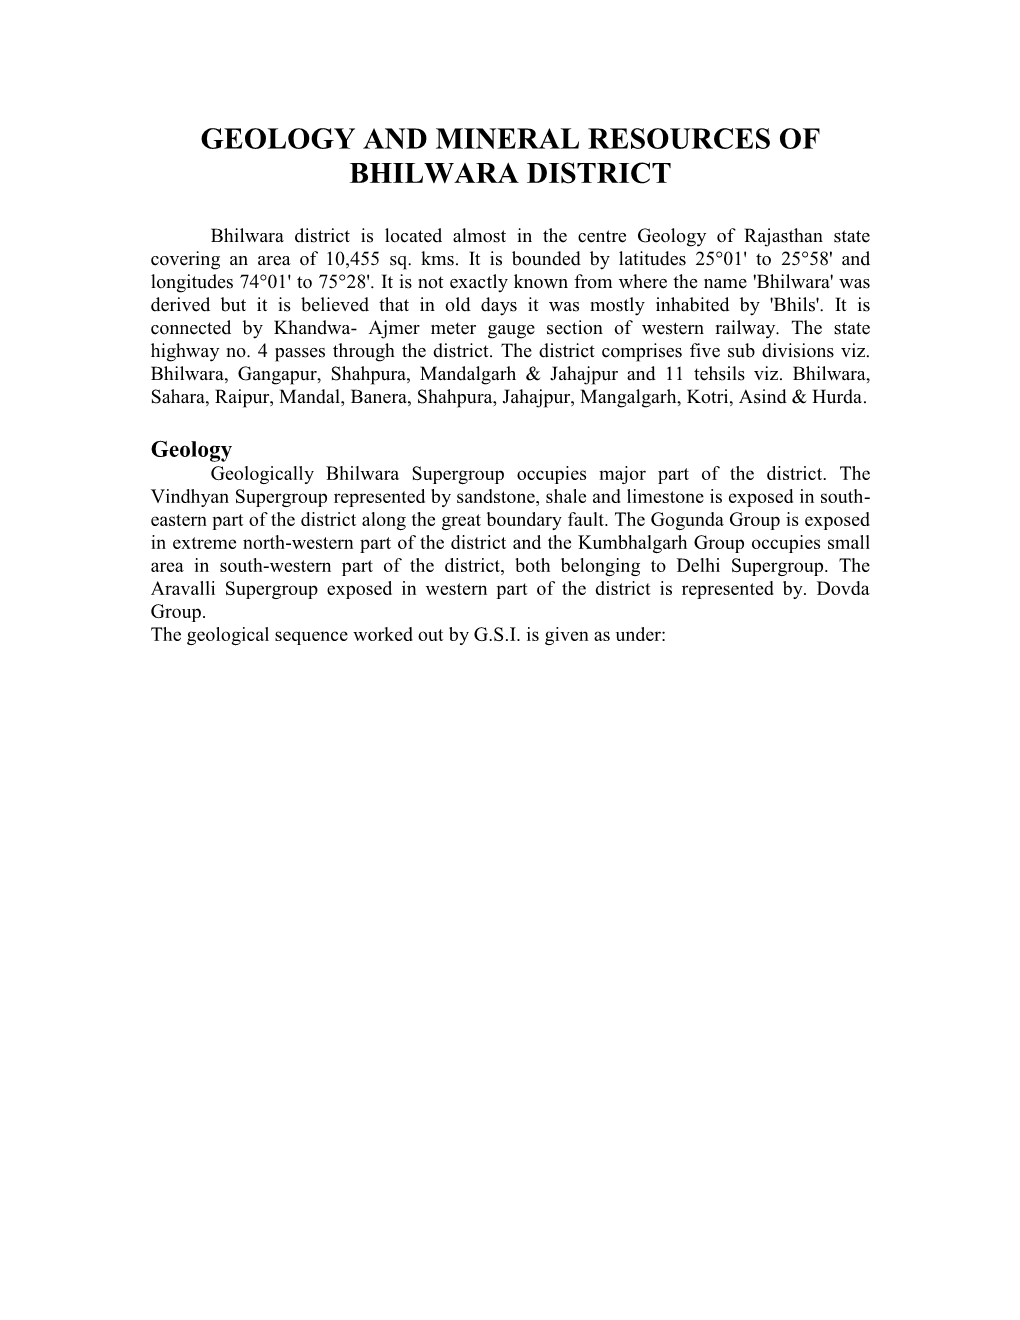 Geology and Mineral Resources of Bhilwara District